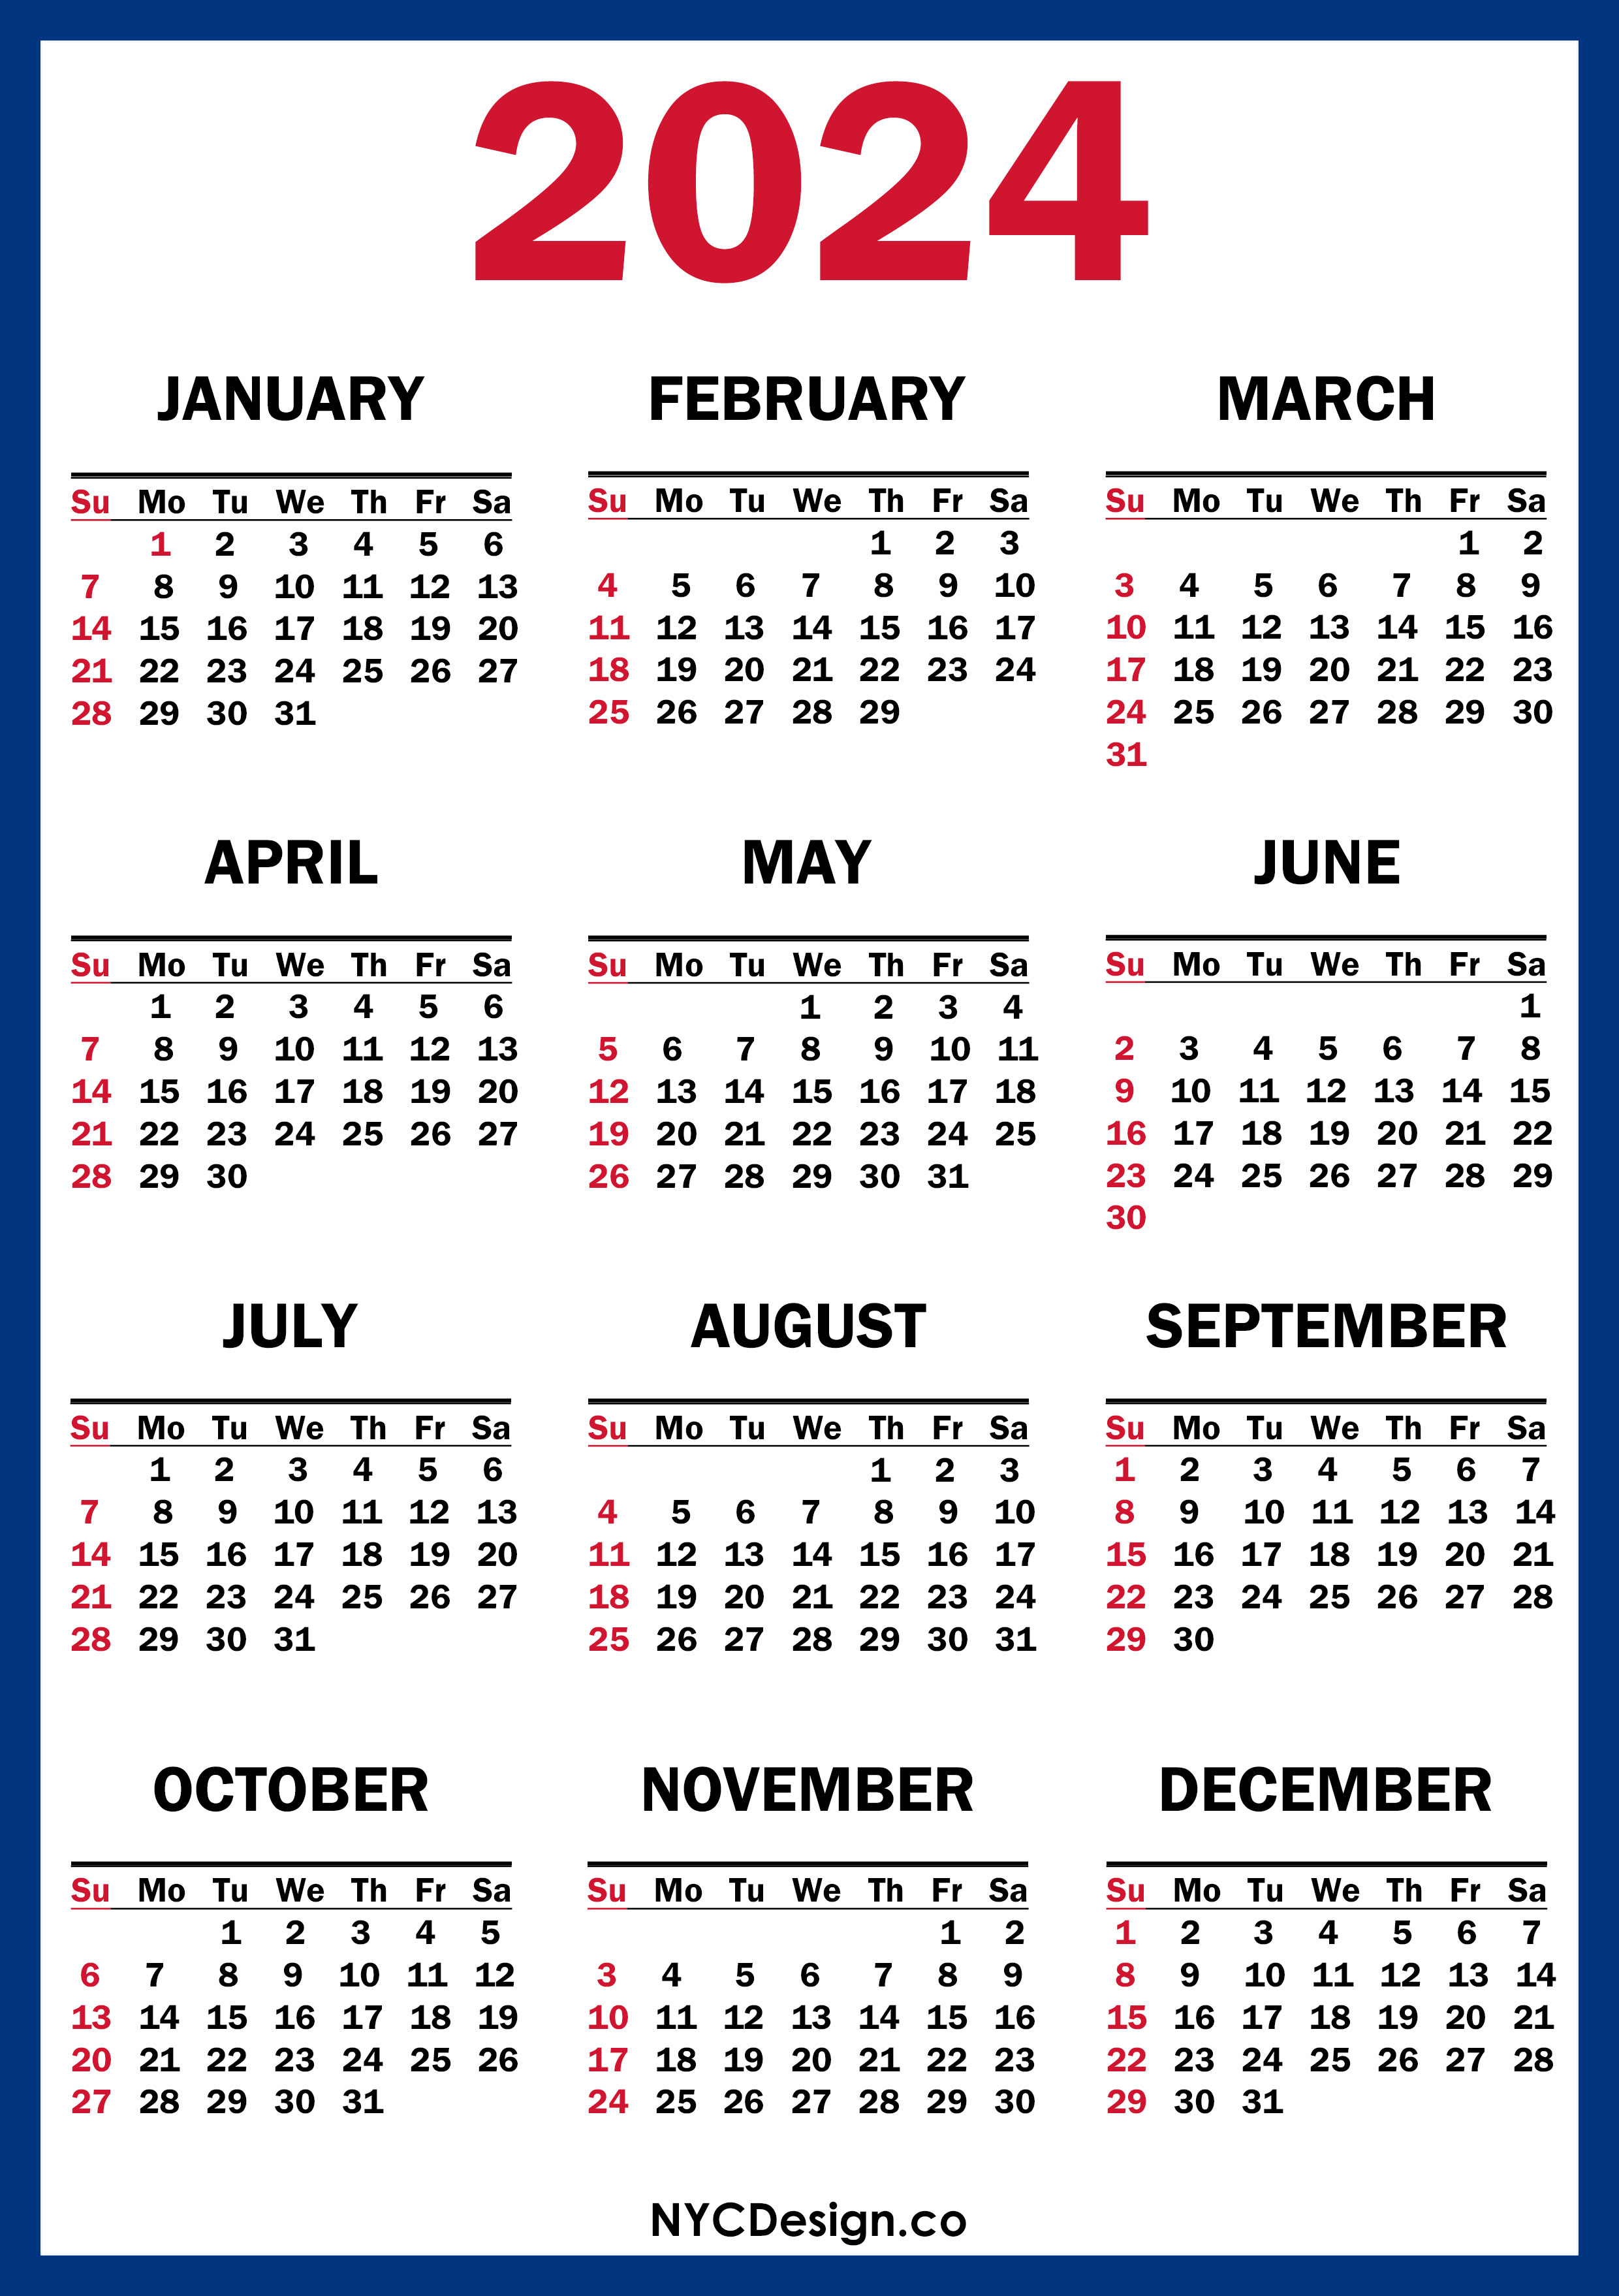 2024 Calendar Printable Free, Blue, Red Sunday Start nycdesign.us